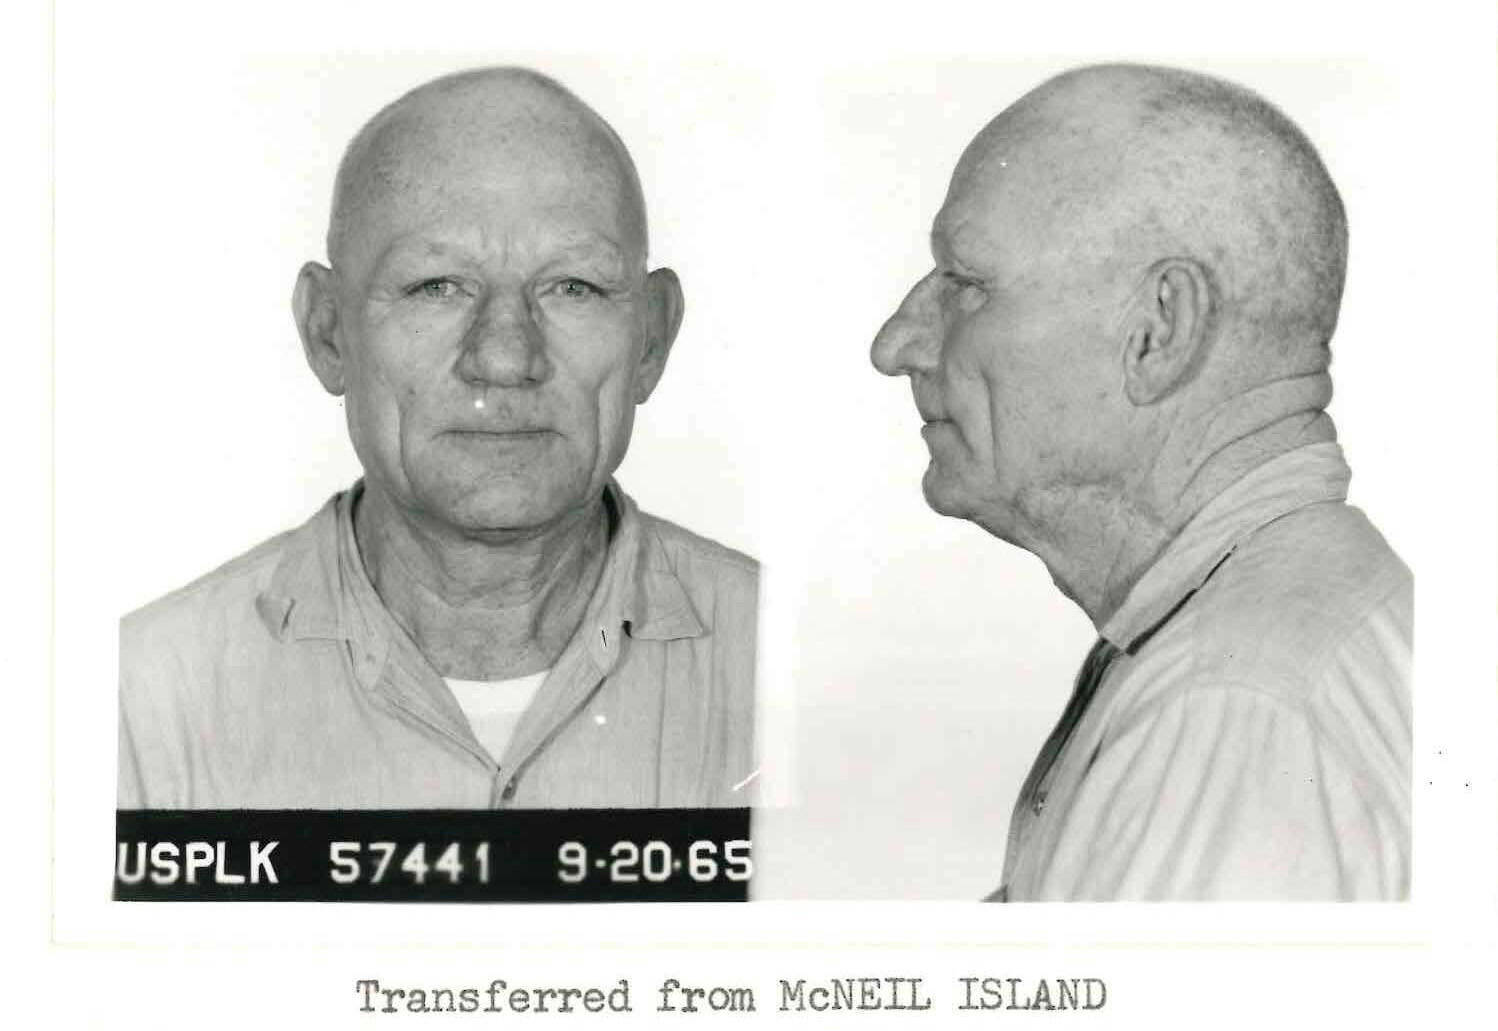 In his late 50s, Arthur Vernon Watson was photographed after another prison transfer. (Photo courtesy of the National Archives)